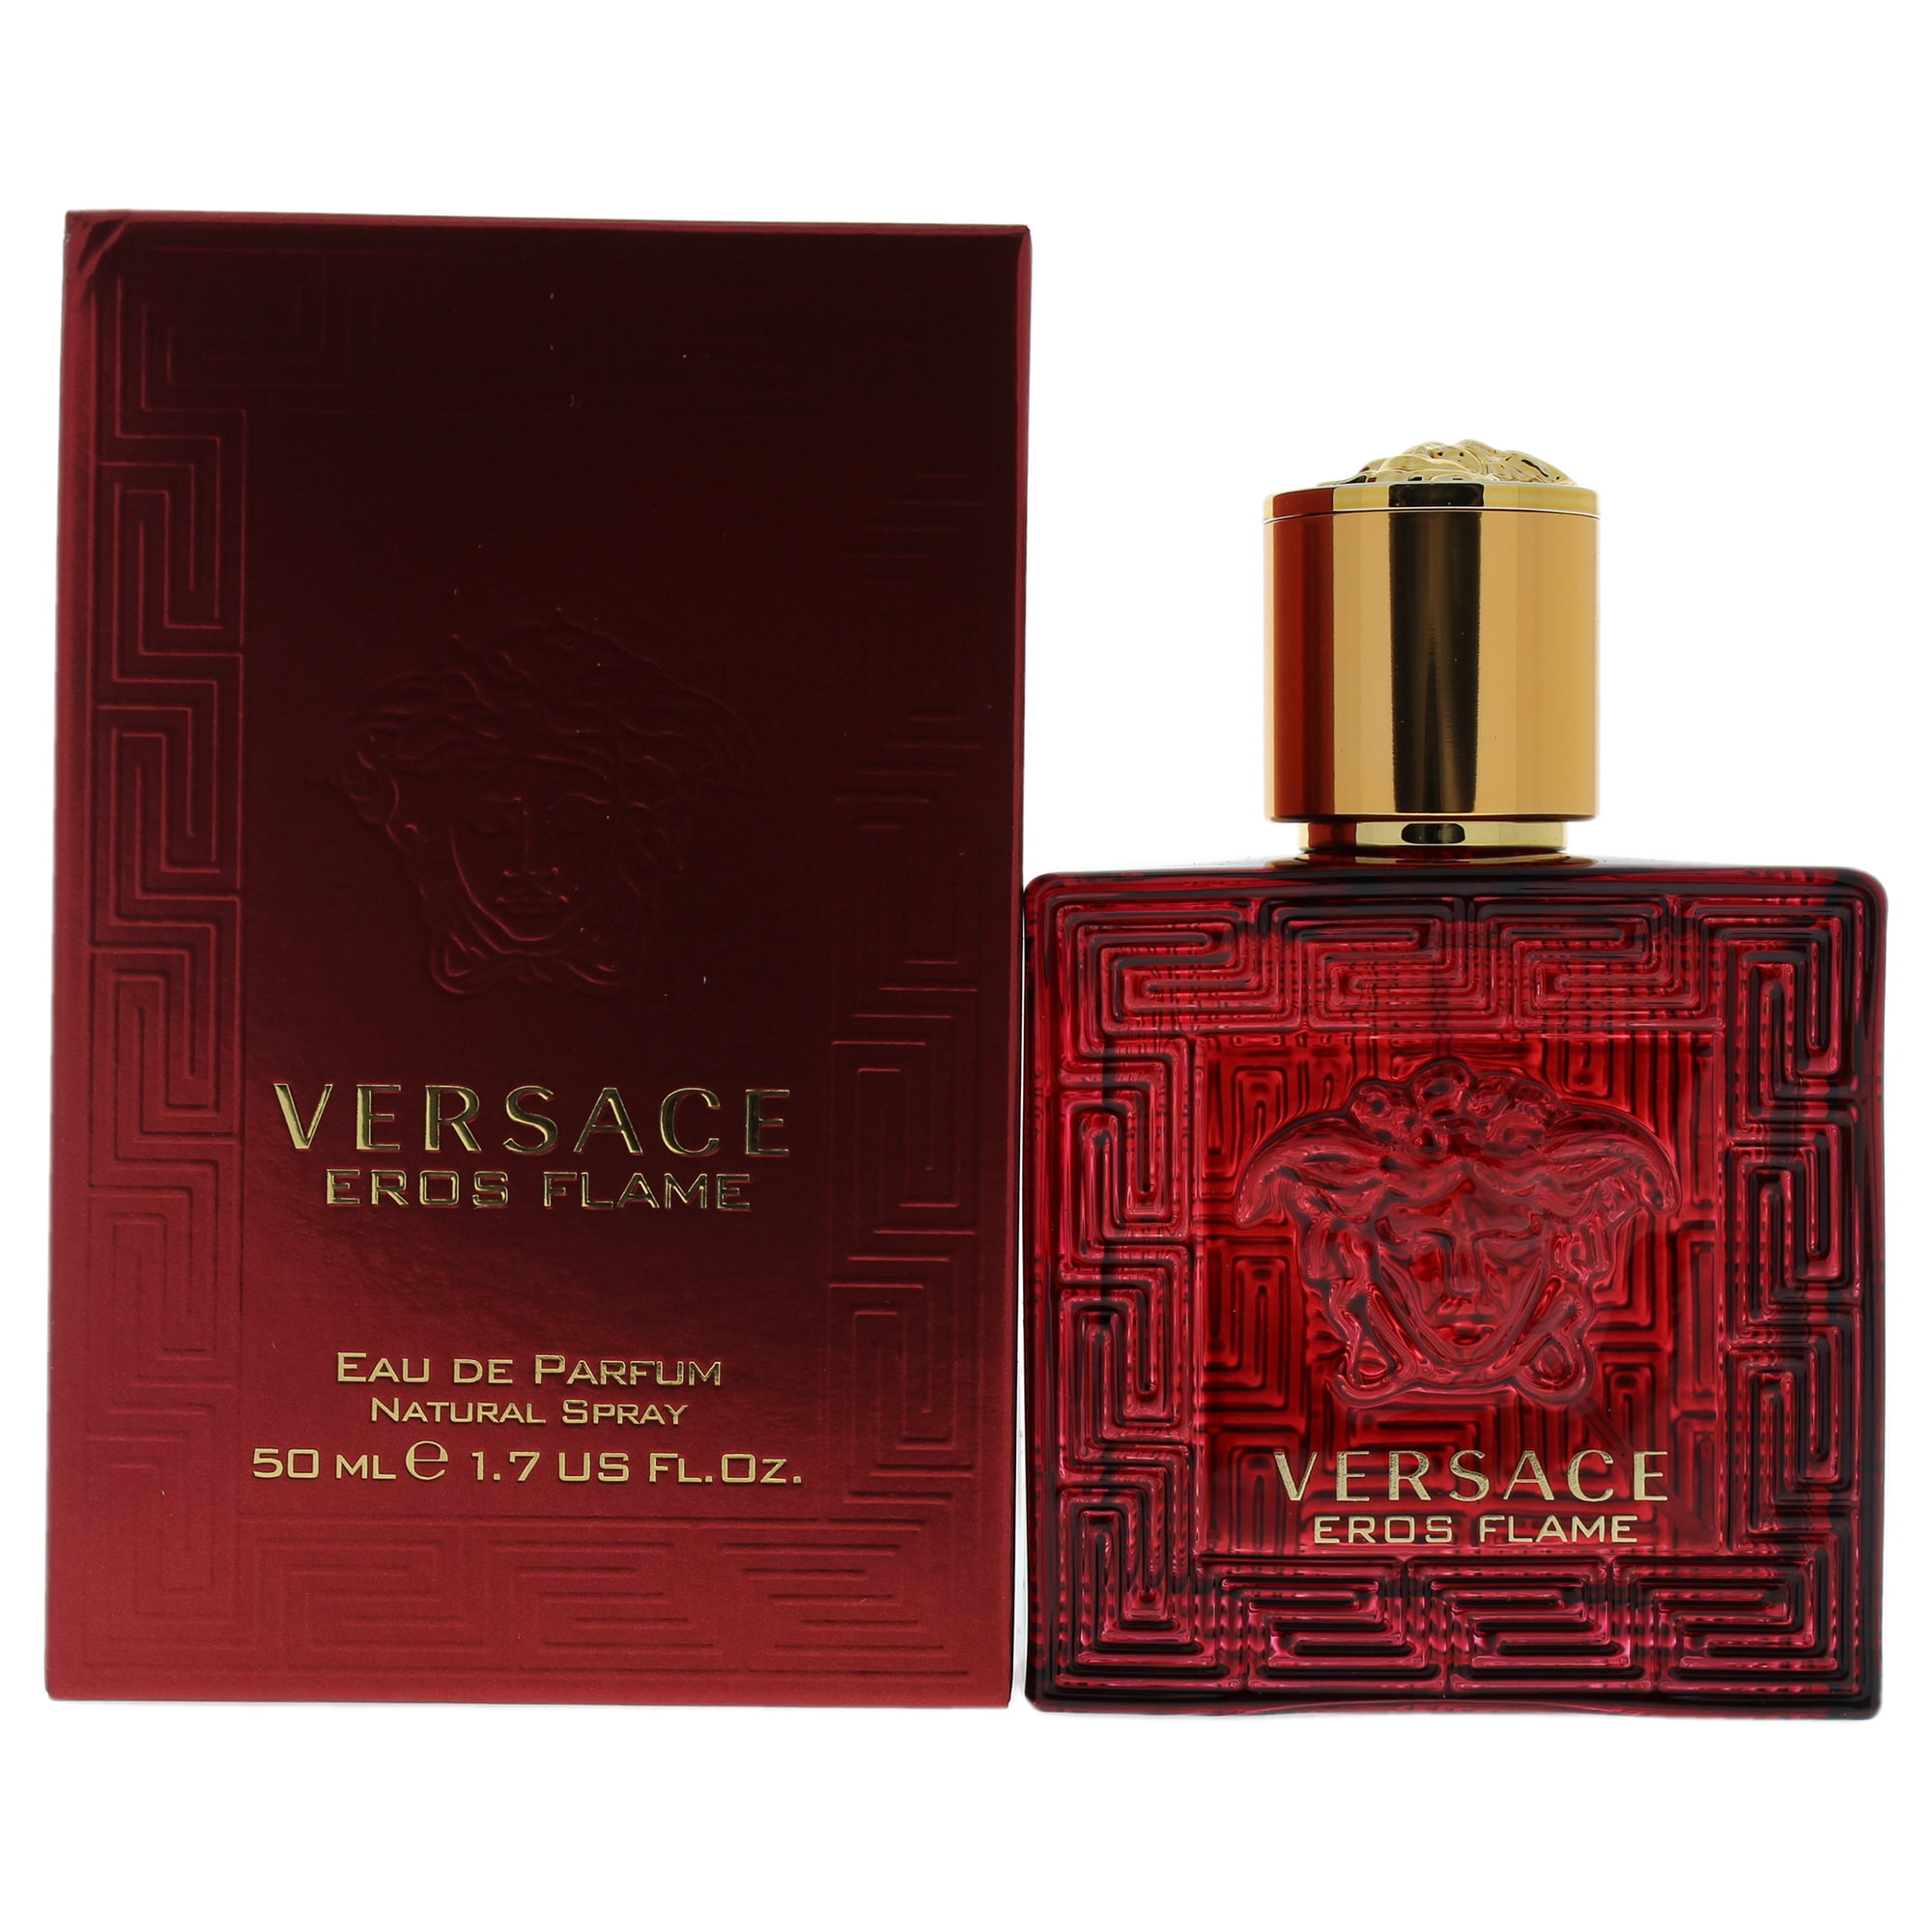 Versace Perfume vs. Gucci Perfume: Which One Is Right for You?